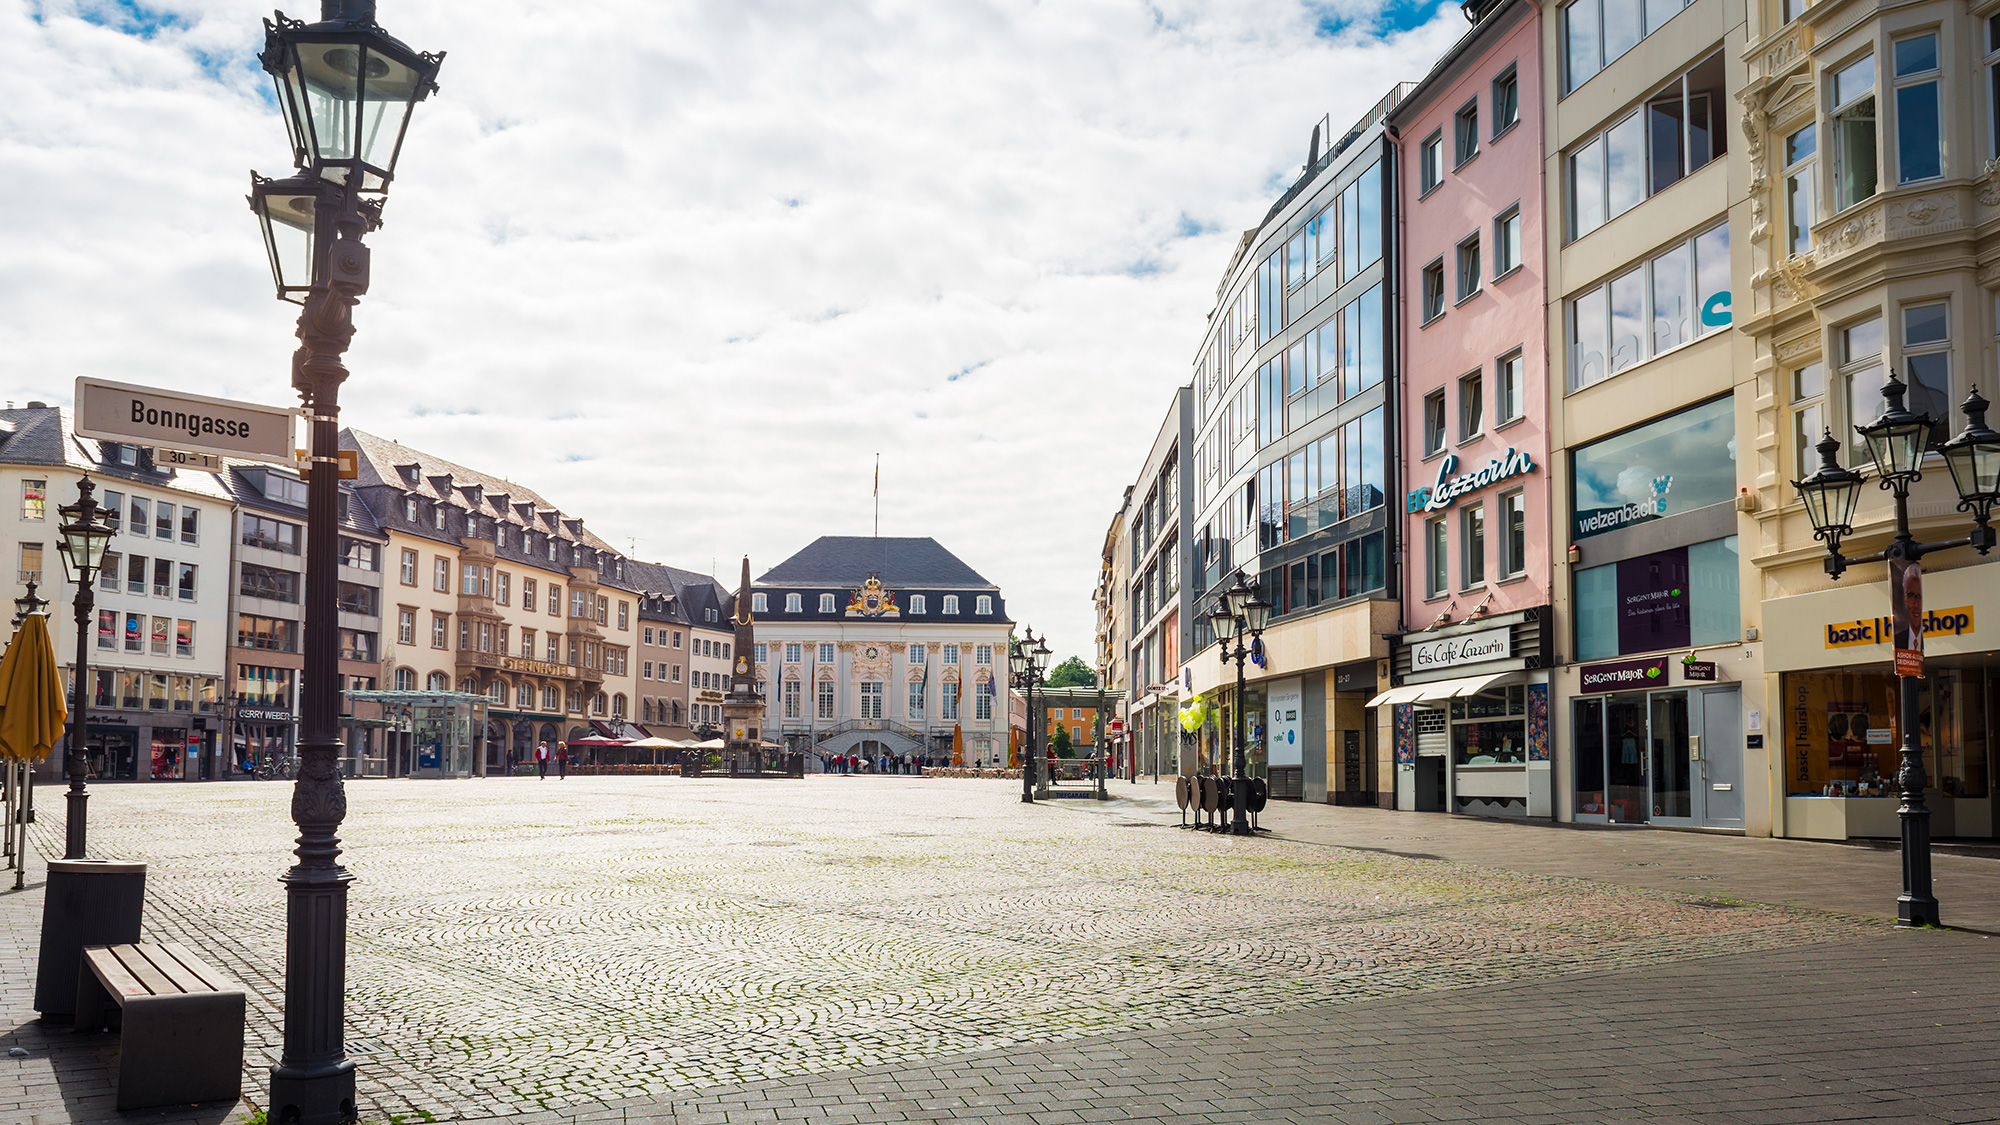 Empty market place in Bonn-City with many shops in the background